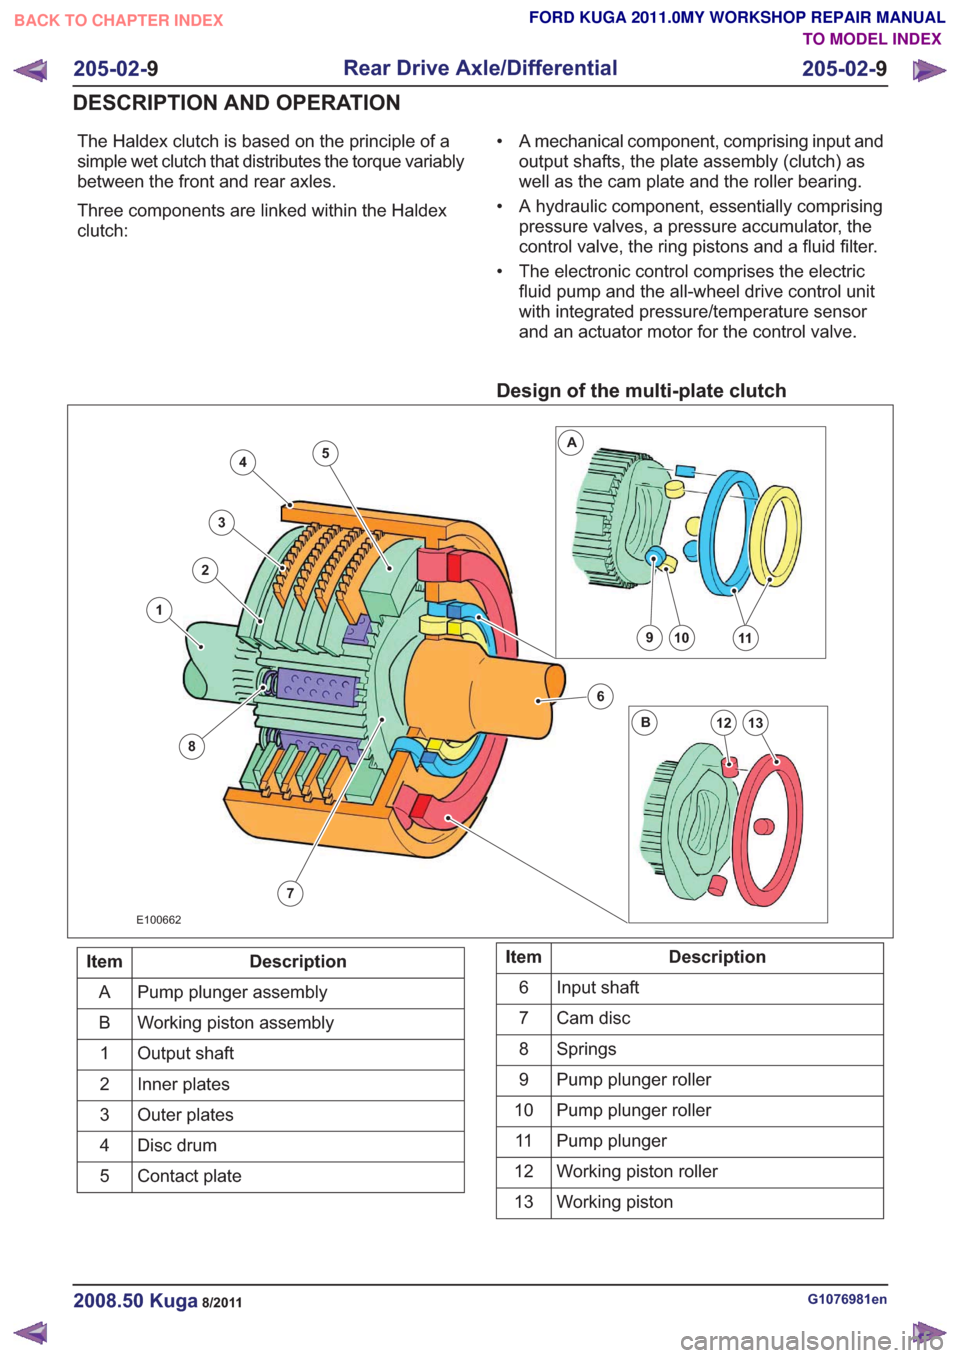 FORD KUGA 2011 1.G Workshop Manual The Haldex clutch is based on the principle of a
simple wet clutch that distributes the torque variably
between the front and rear axles.
Three components are linked within the Haldex
clutch:• A mec